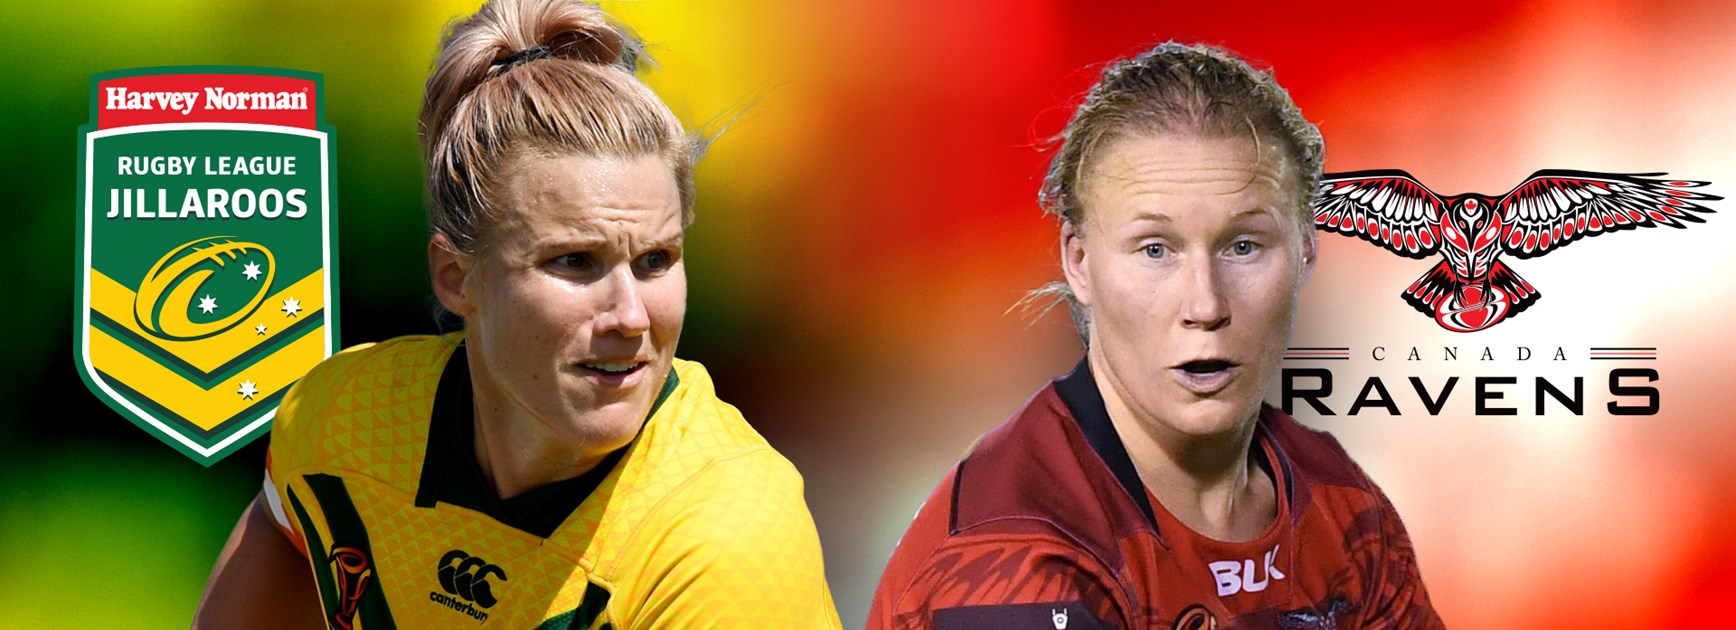 Renae Kunst (left) and Mandy Marchak will go head to head when the Jillaroos take on Canada.